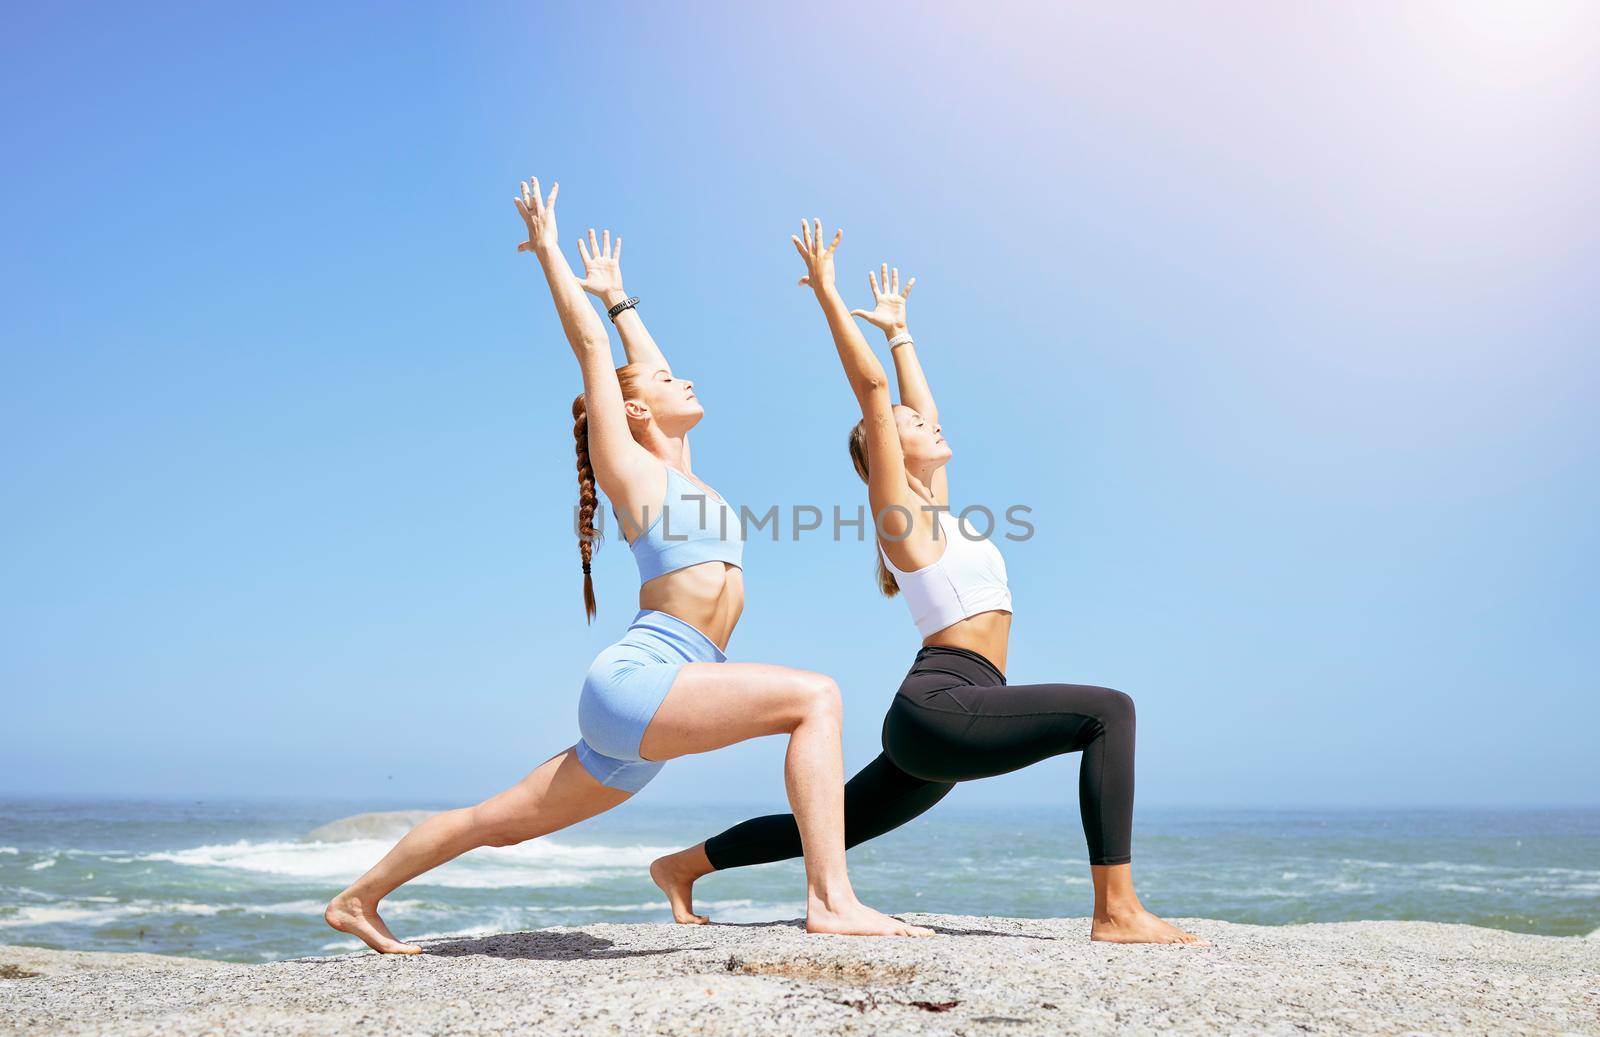 Health, meditation and women doing yoga at beach, mediation and fitness training in summer together. Peace, energy and friends exercise and bond while stretching in the sun and enjoying the ocean.